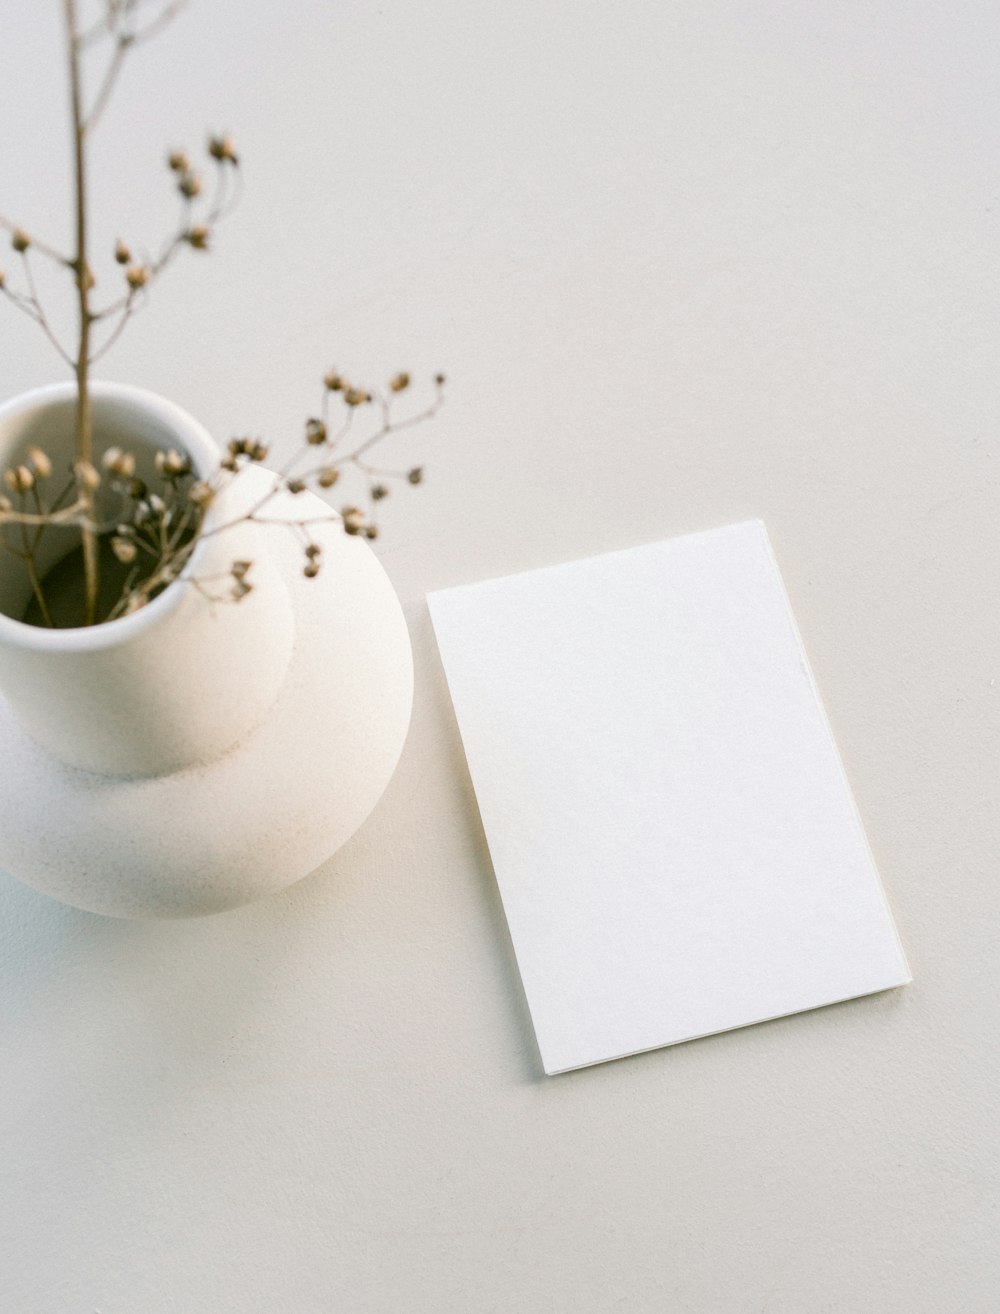 a white vase with a plant in it next to a blank card